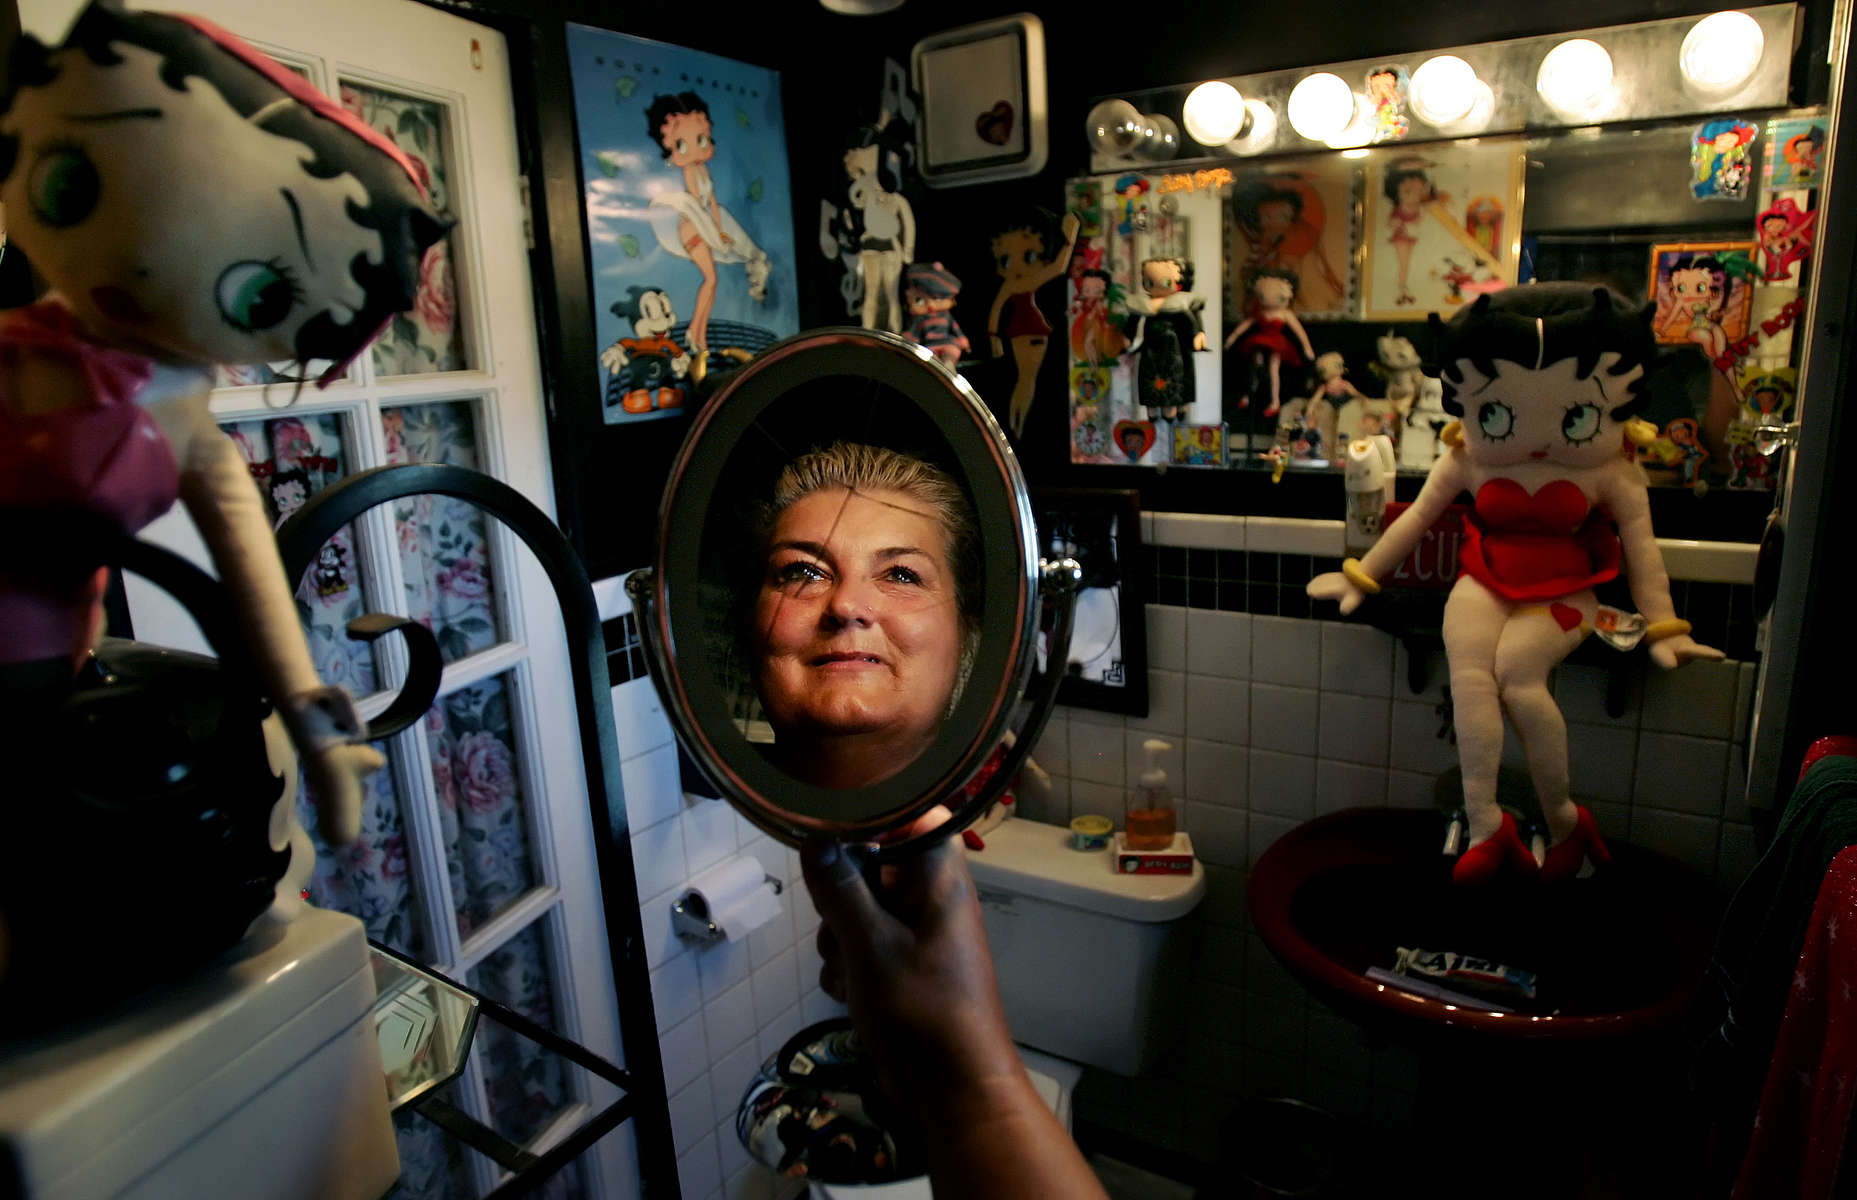 Menifee, Calif., school district trustee Rita Peters of Quail Valley is preparing to be featured on a segment of Rachel Ray's show featuring America's coolest bathrooms. One of hebathrooms has a Betty Boop theme. (The Press-Enterprise/ Mark Zaleski)